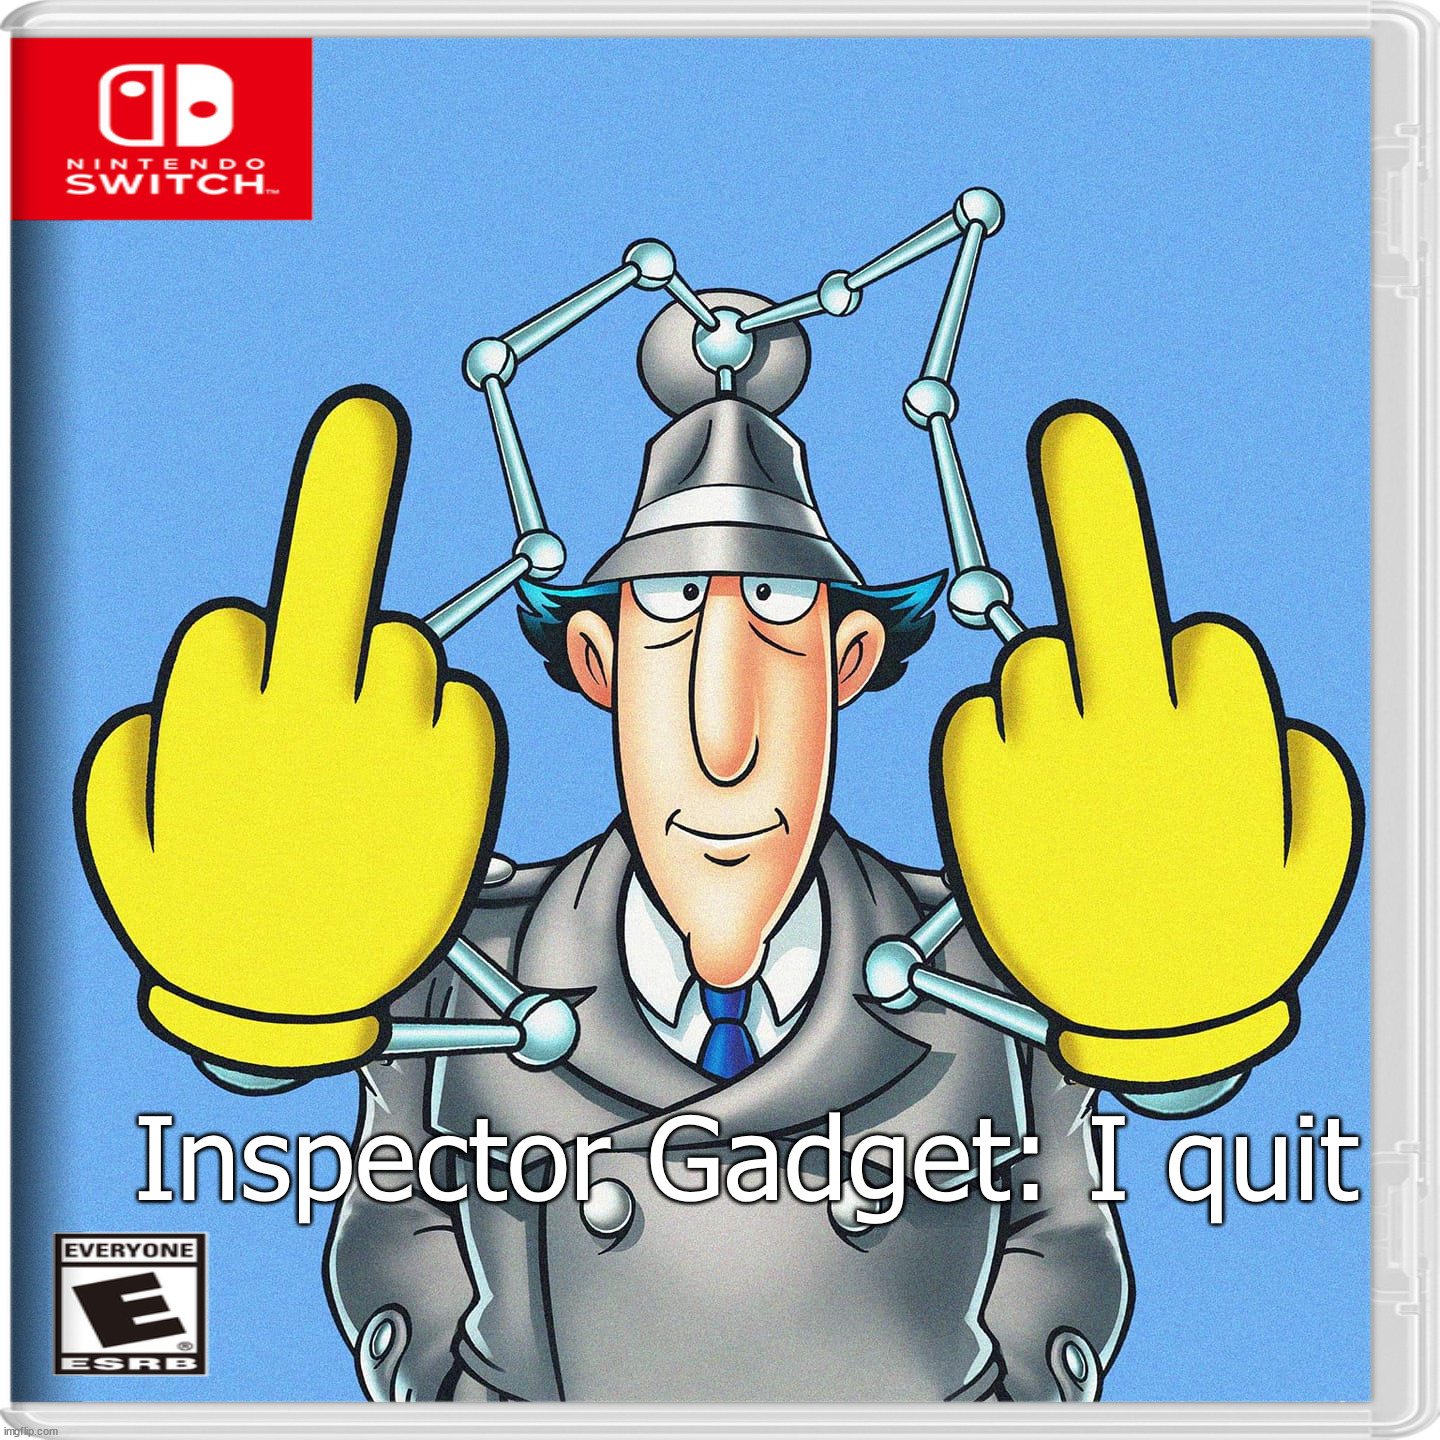 Inspector Gadget: I quit | image tagged in nintendo switch | made w/ Imgflip meme maker